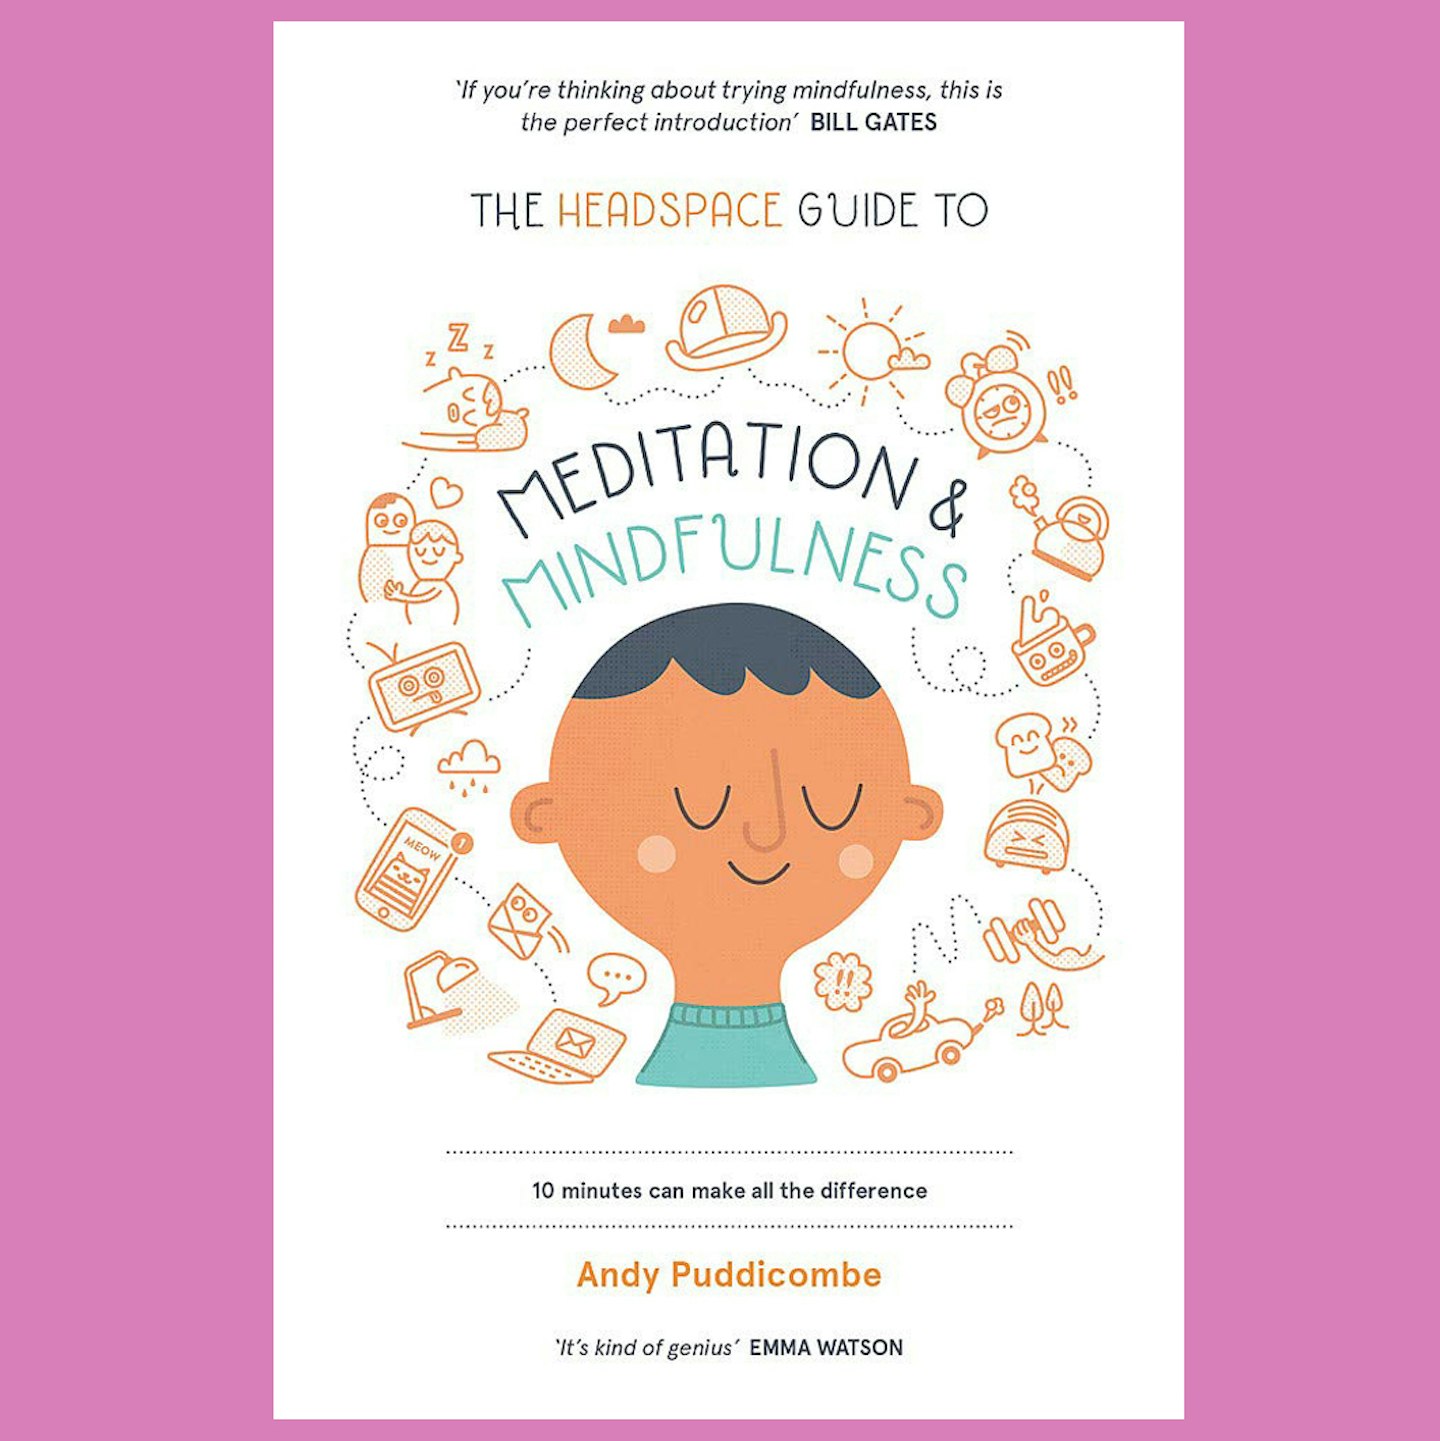 The Headspace Guide to Mindfulness & Meditation by Andy Puddicombe